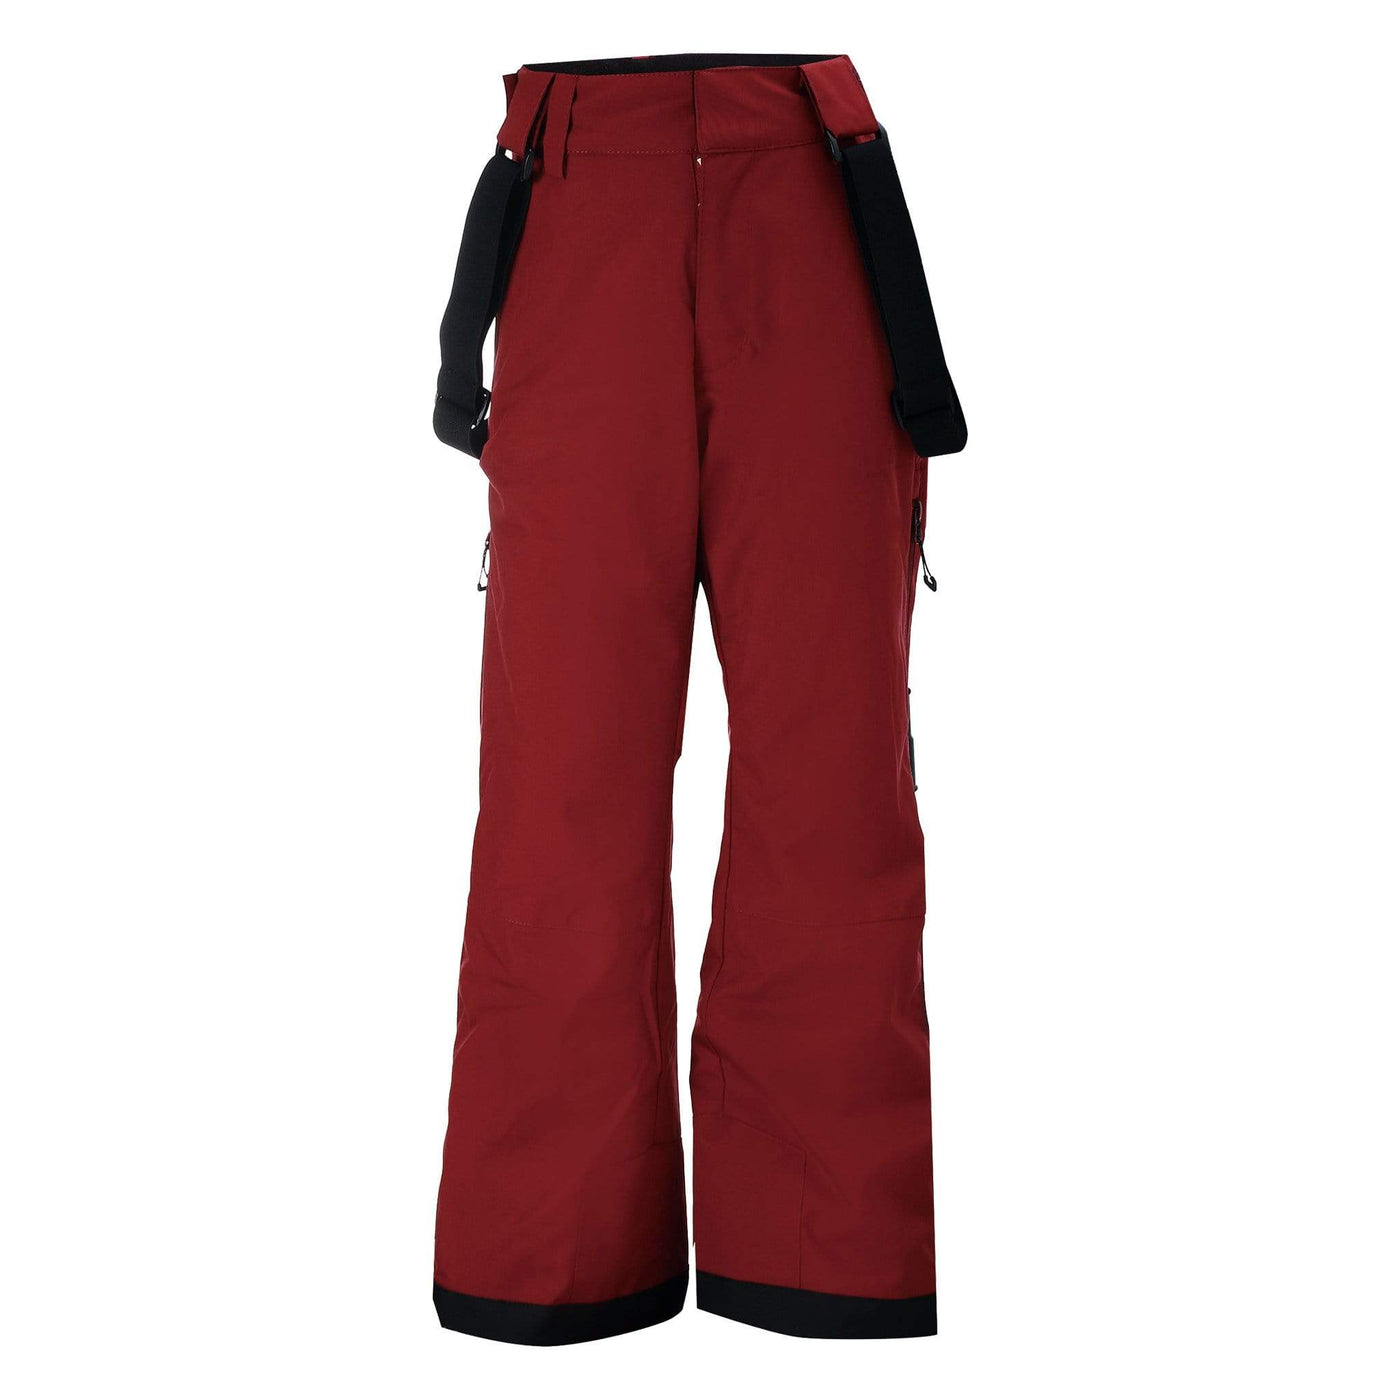 SnowKids Outerwear Pants 128 2117 Of Sweden Kids Lammhult Padded Ski Pant - Wine Red